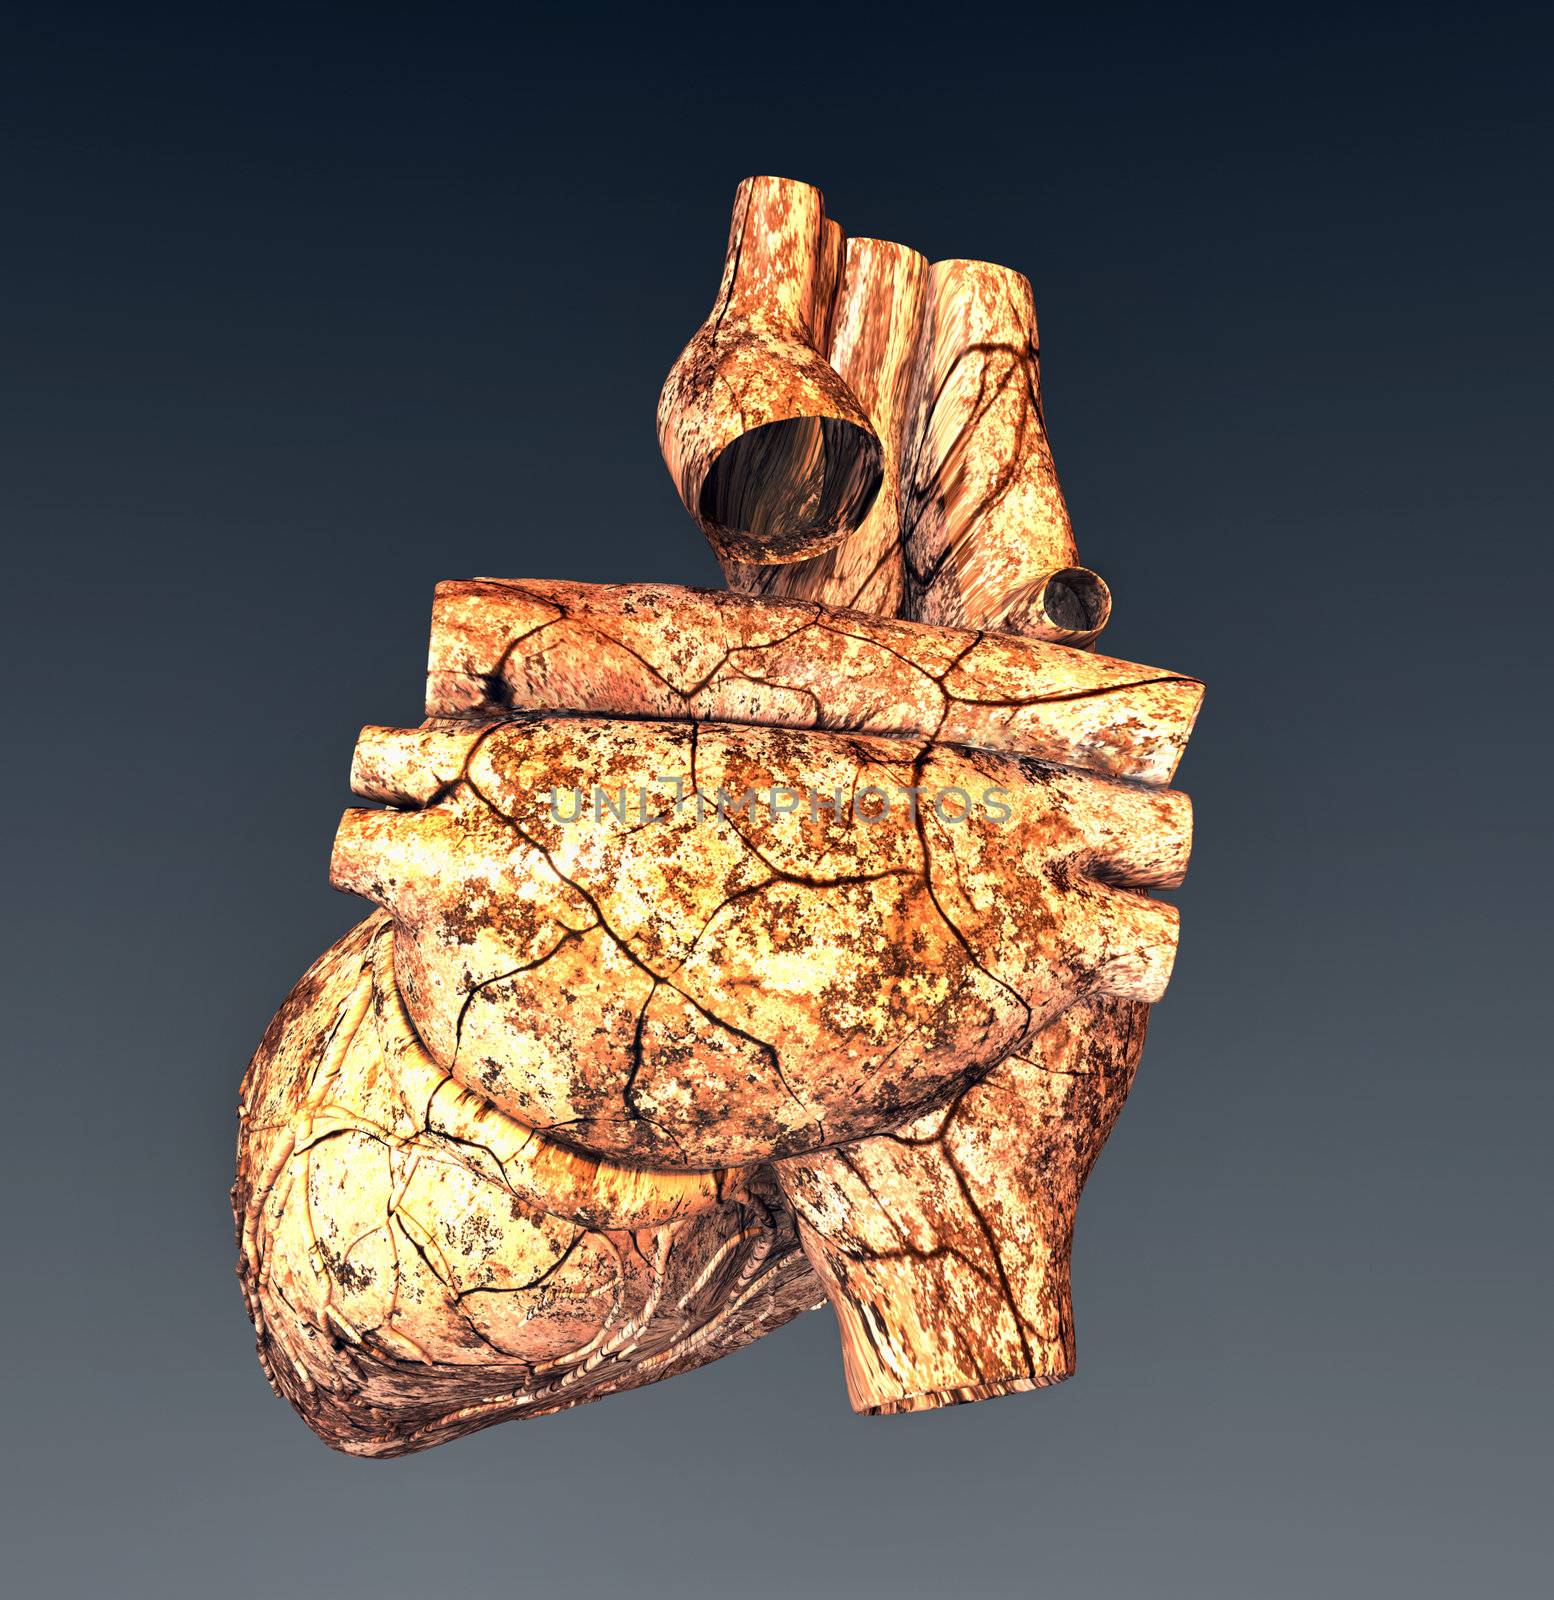 Model of ruined human heart by andromeda13